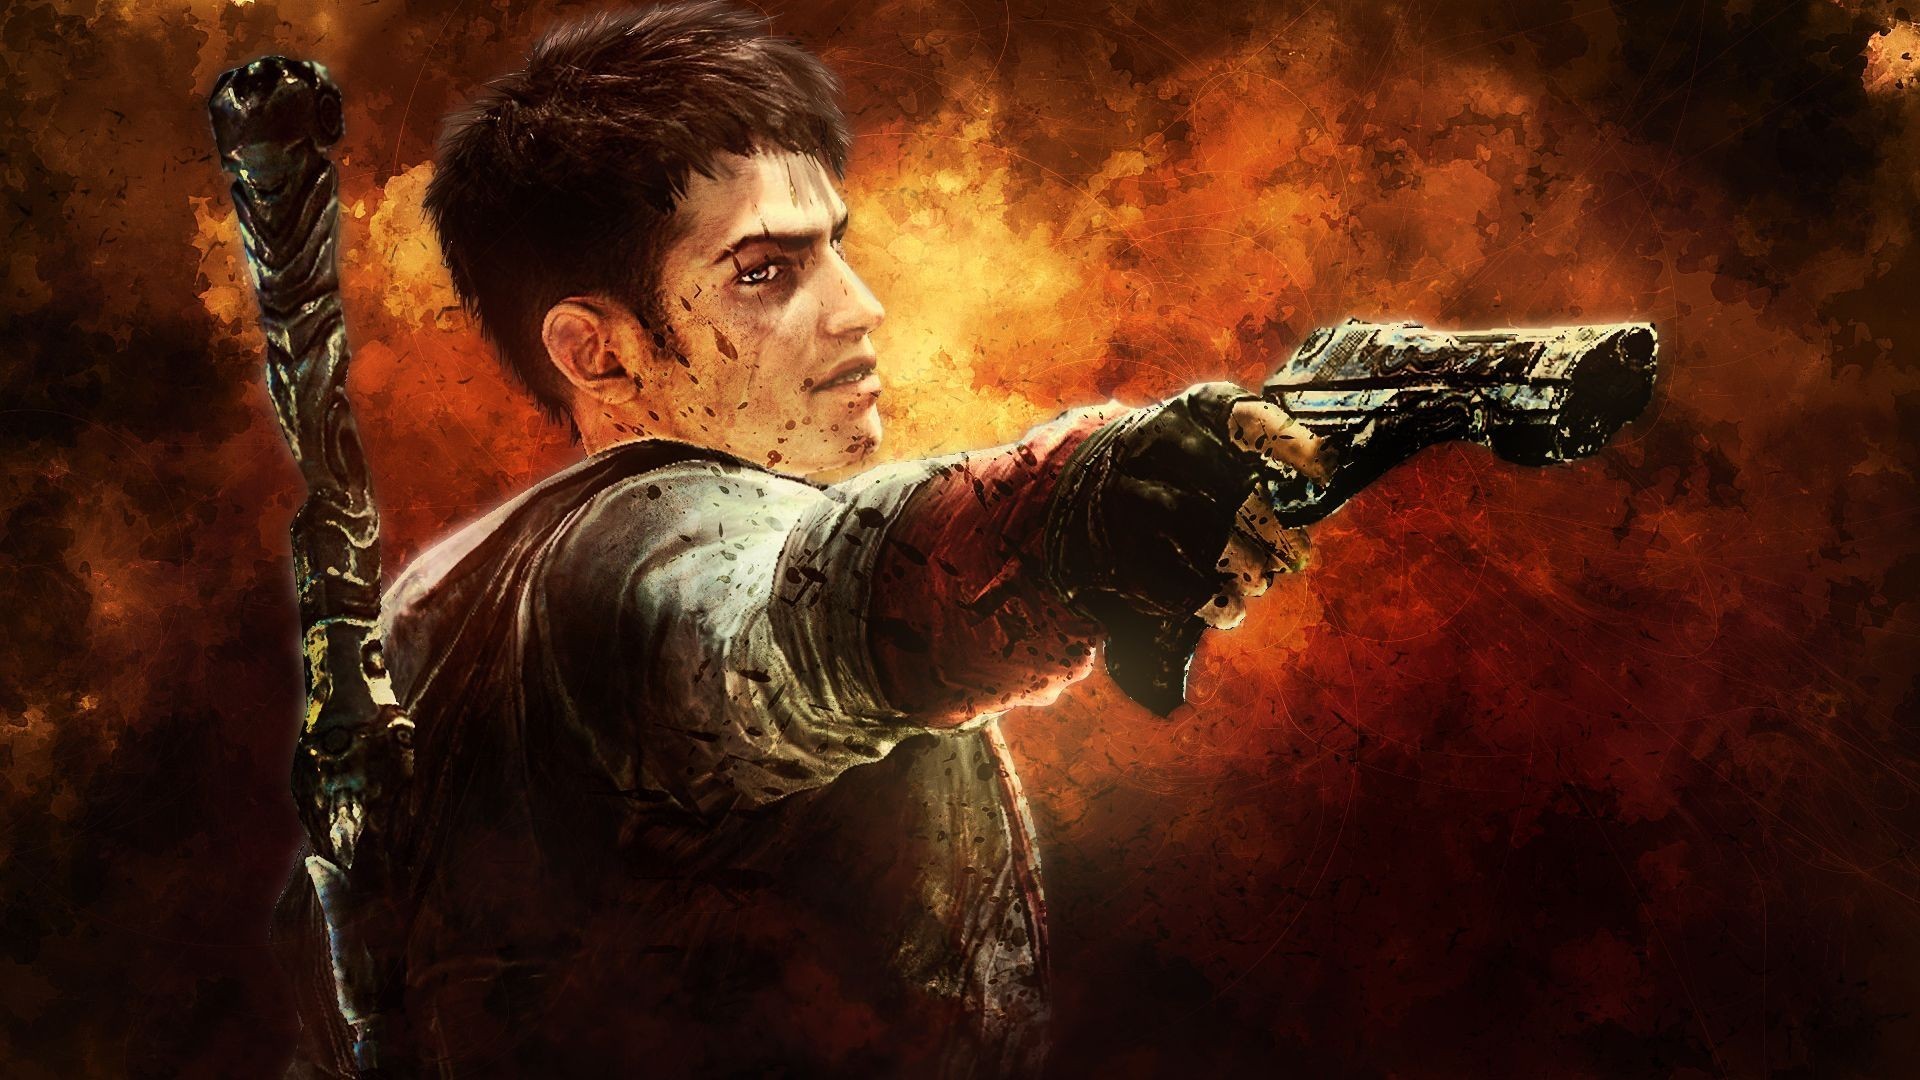 1920x1080 Explore Gaming Wallpapers, Devil May Cry, and more!